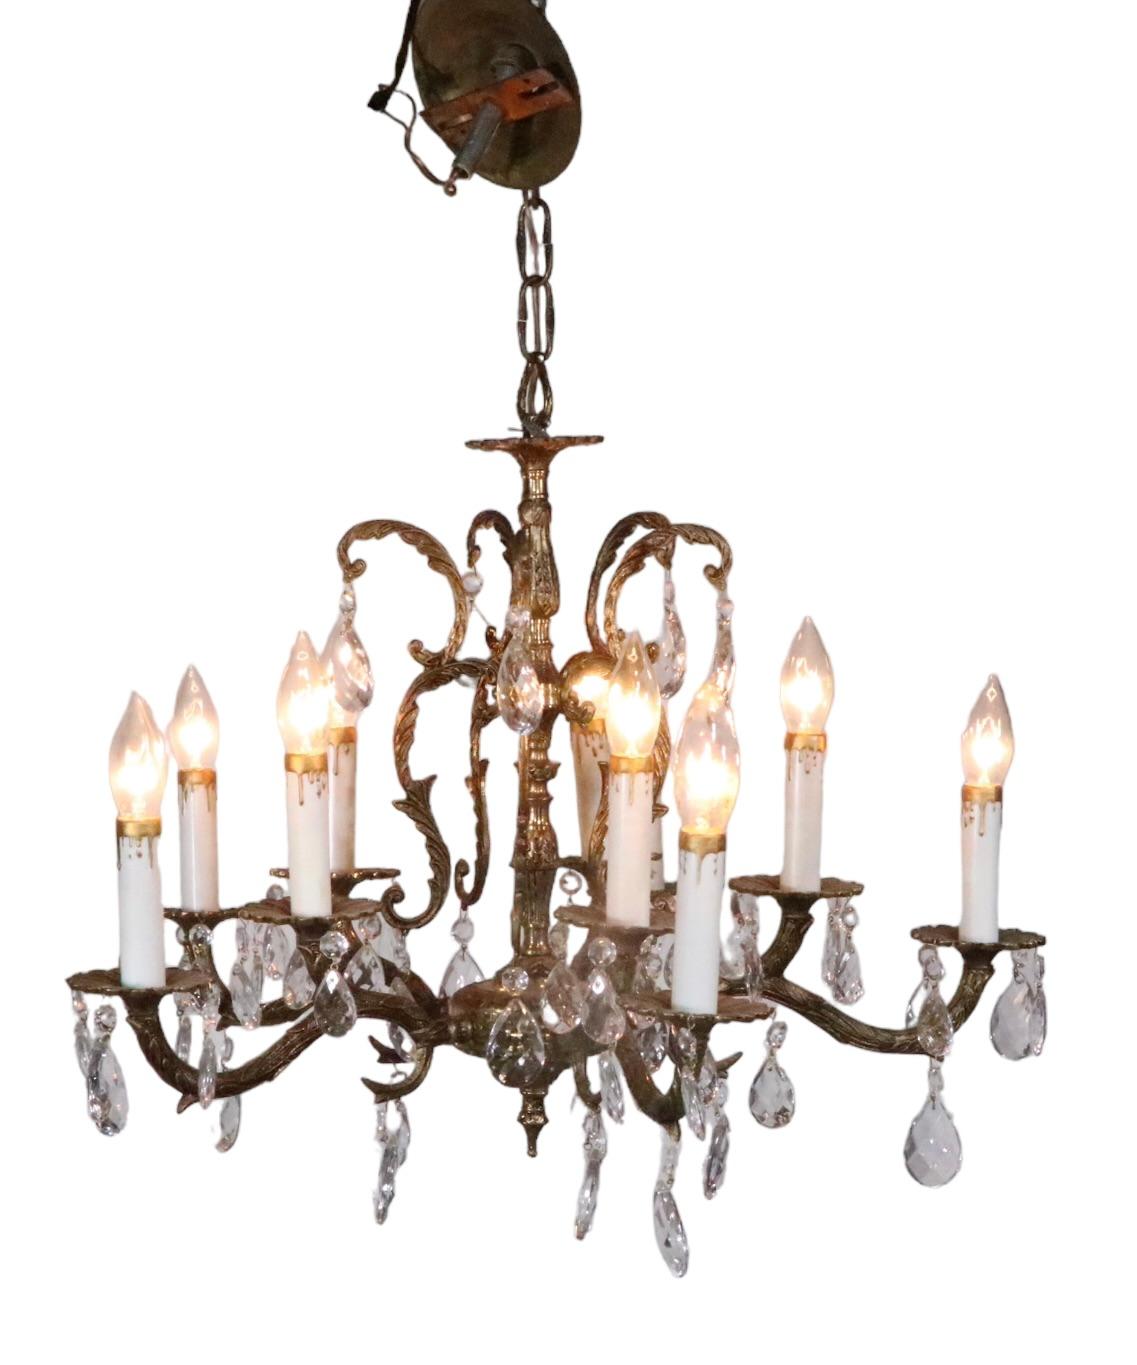 Ornate Cast Brass and Crystal  10 Light Chandelier Made in Spain c 1950's For Sale 5